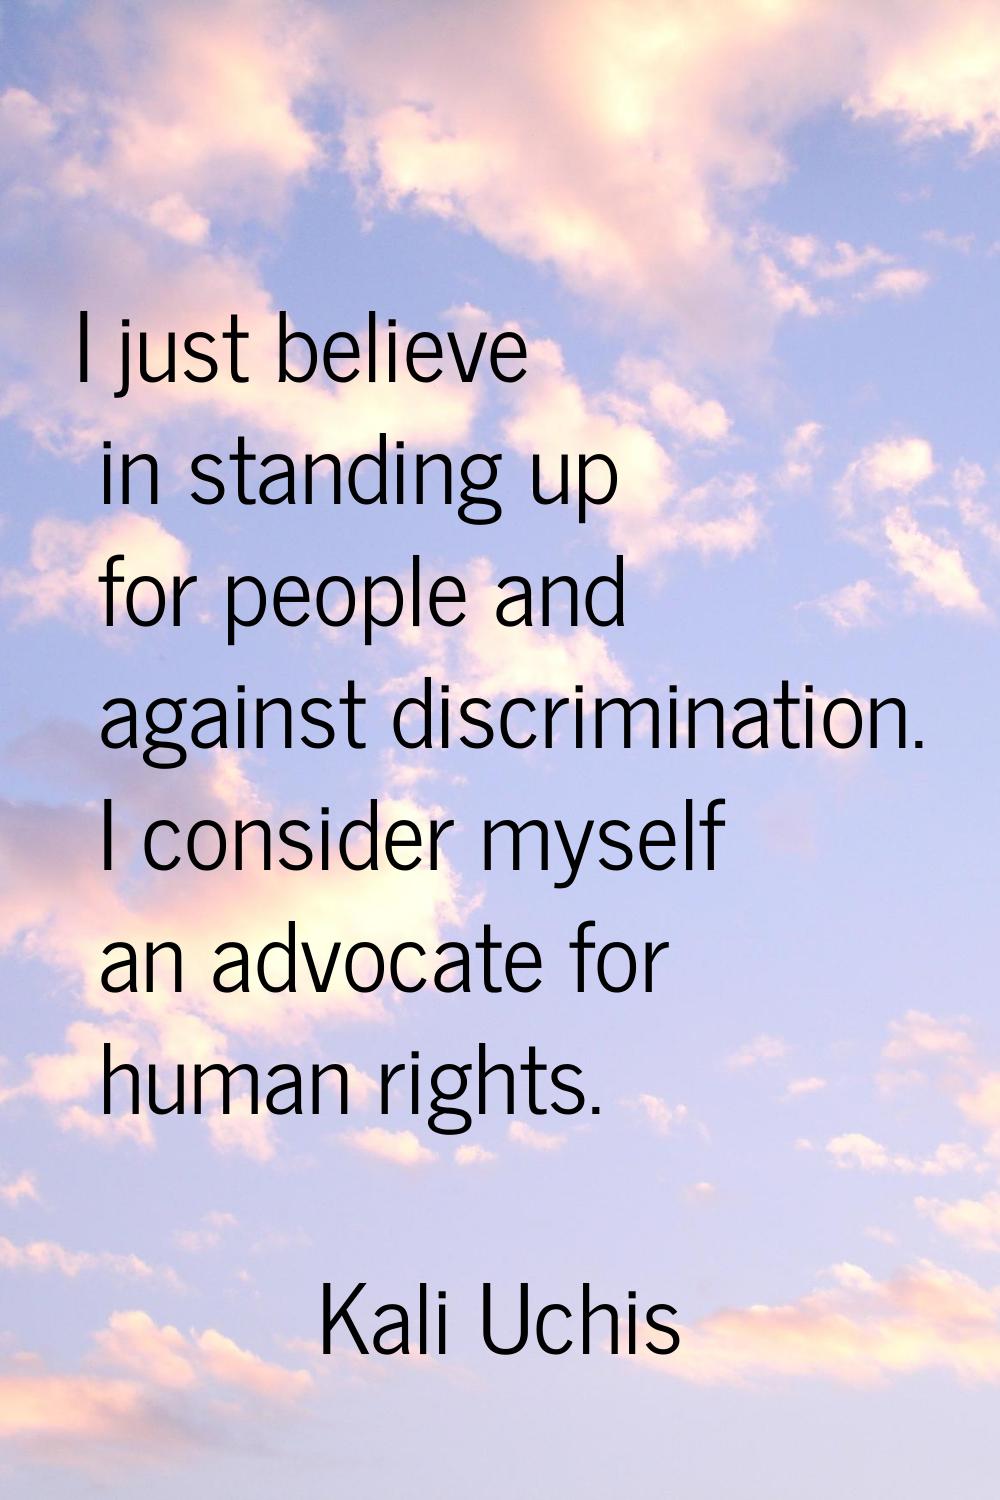 I just believe in standing up for people and against discrimination. I consider myself an advocate 